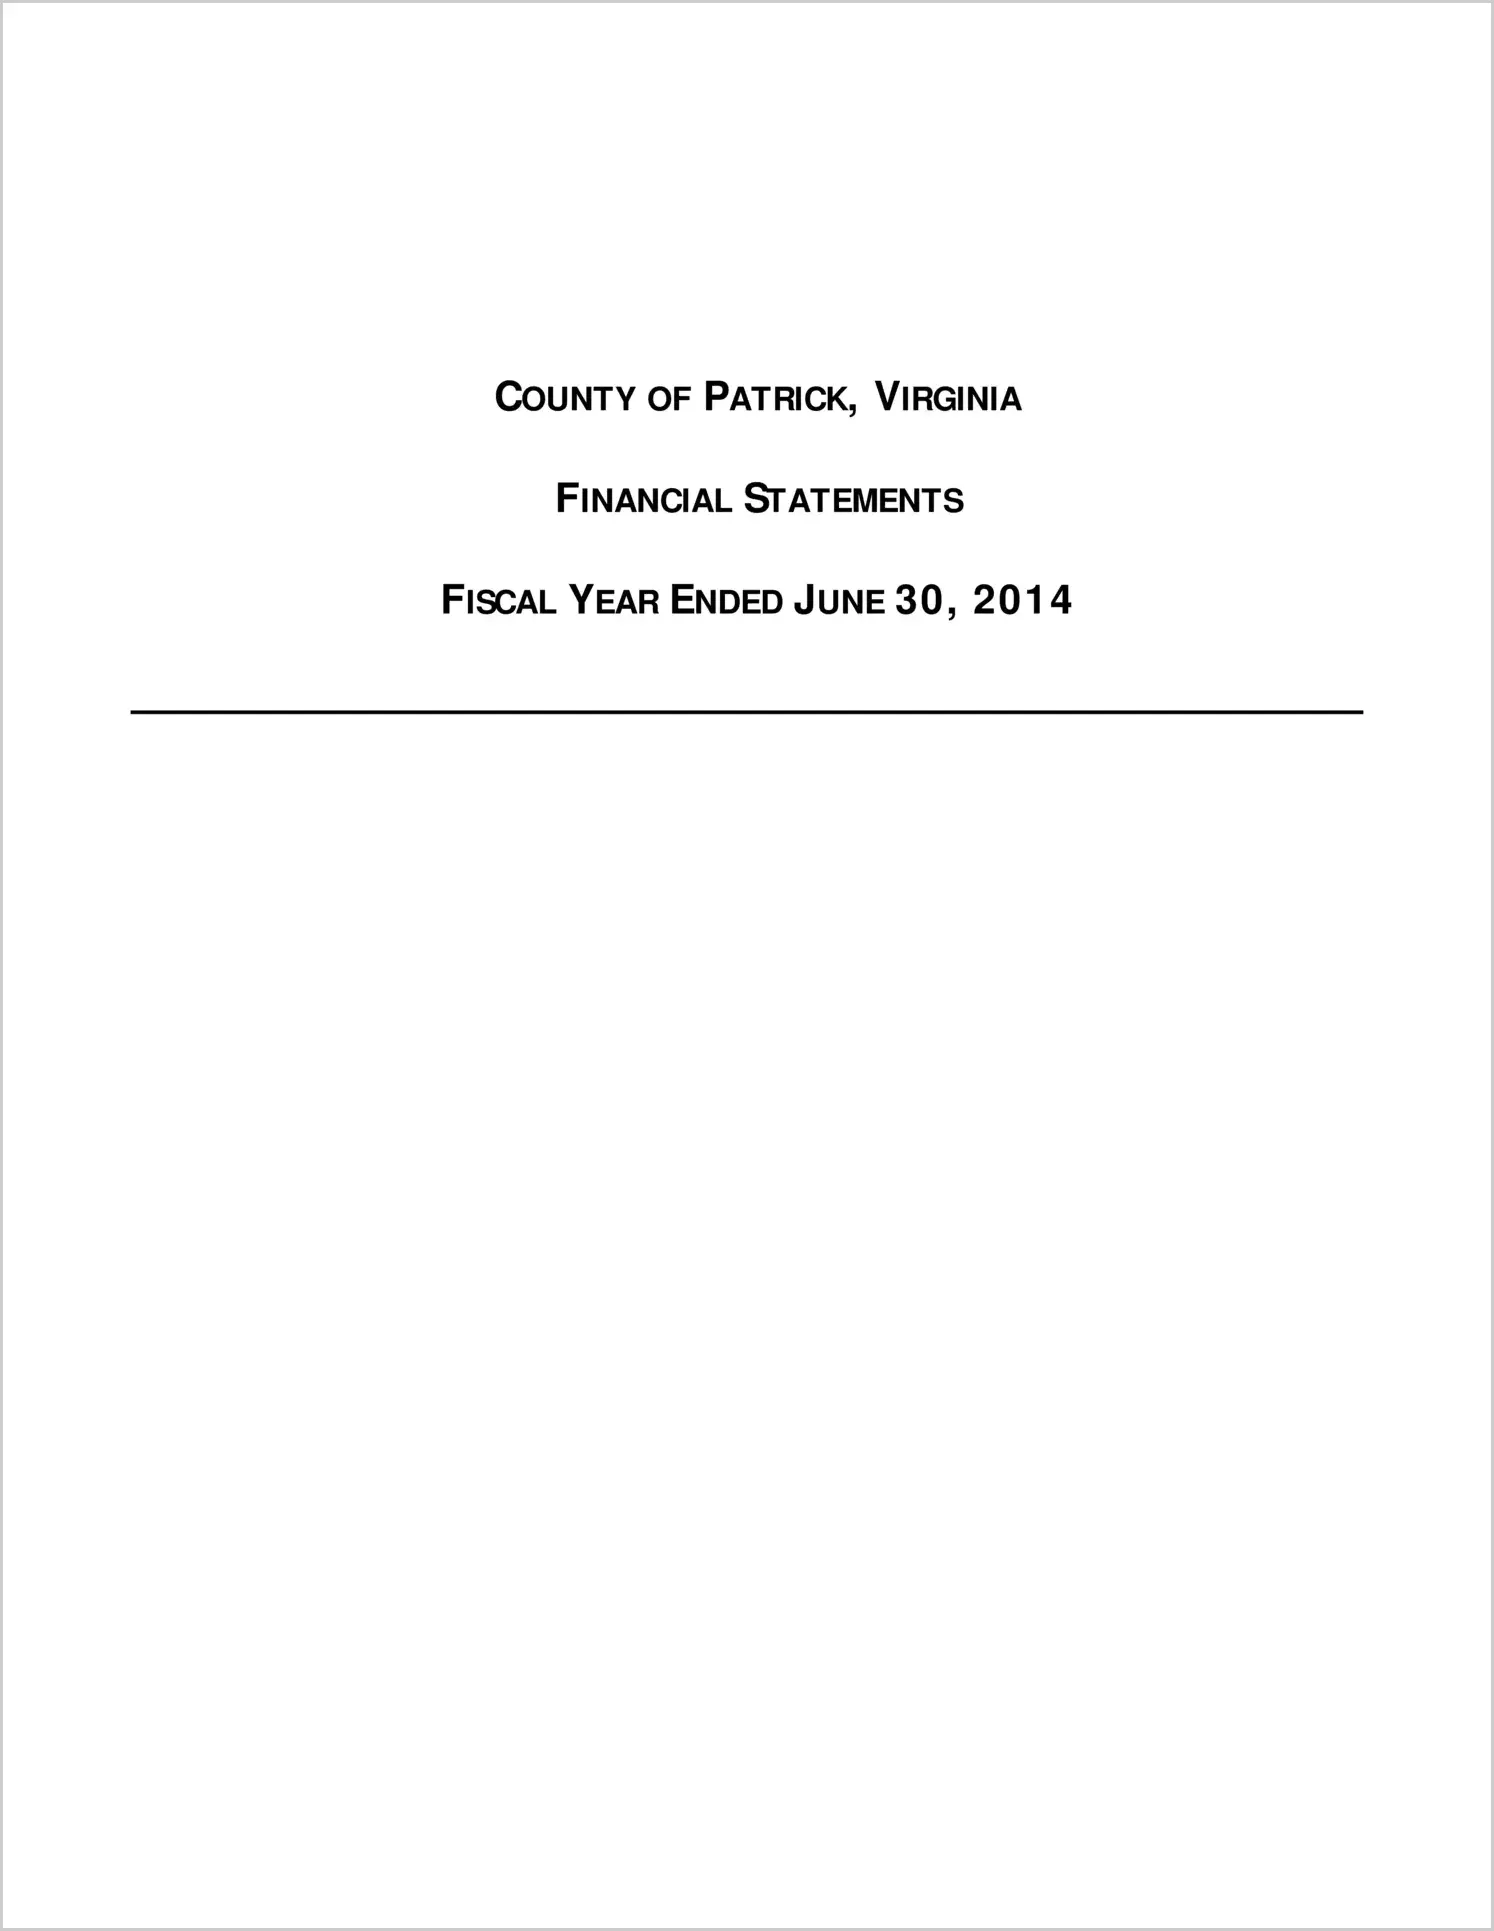 2014 Annual Financial Report for County of Patrick